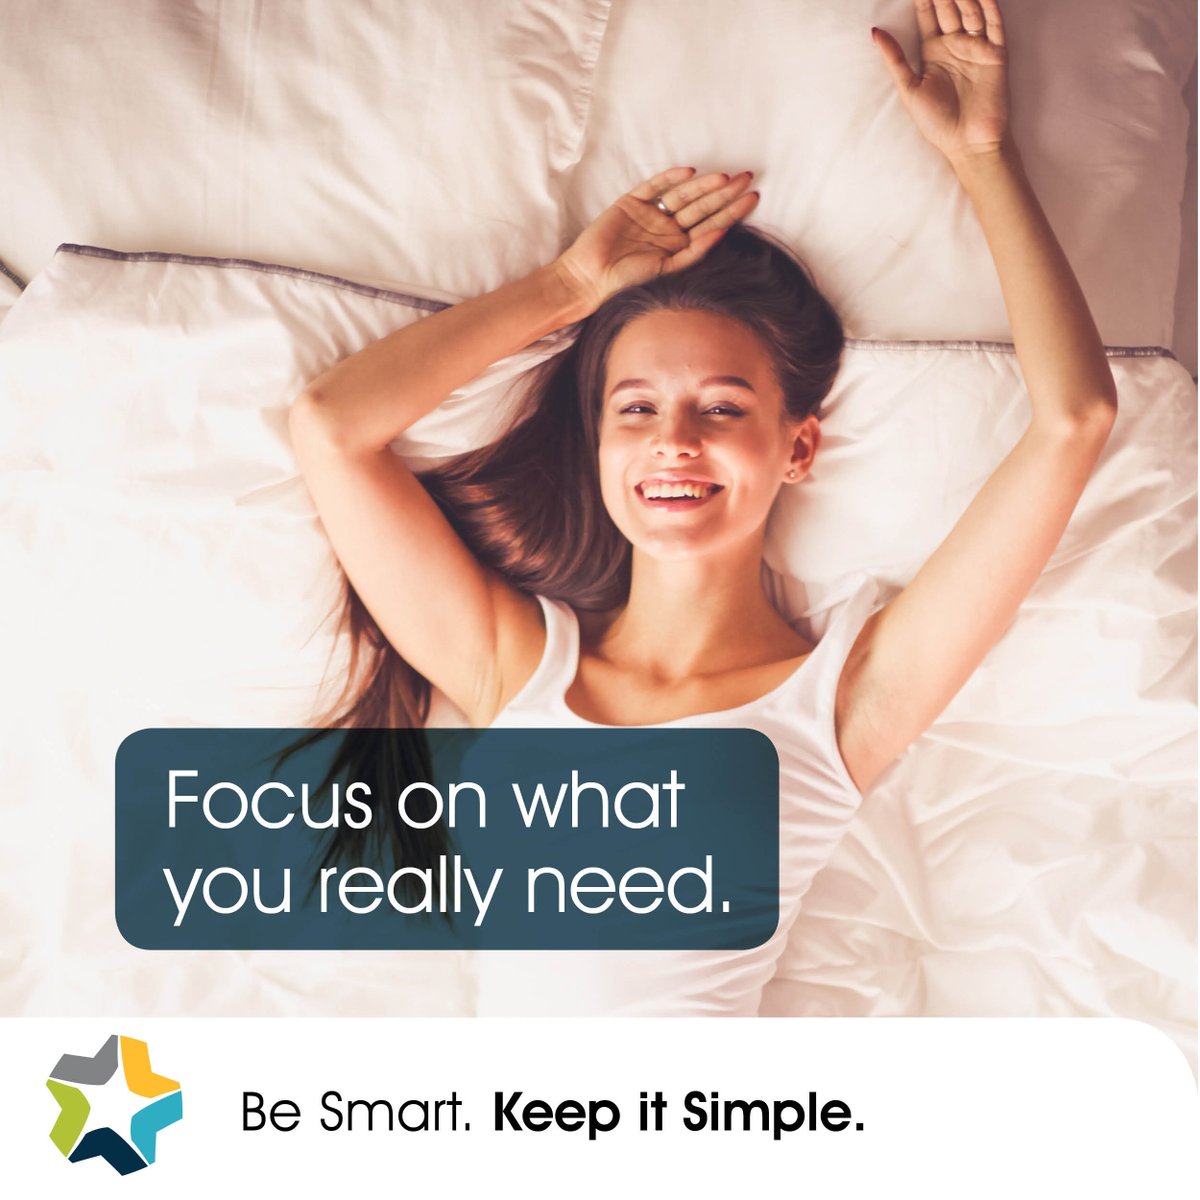 Decorative continental pillows may spruce up your bedroom, but are they really necessary, if all you want to do is rest your head? 

Life’s complicated enough. Your medical aid shouldn’t be. Switch to KeyHealth for cost-effective medical aid.

#ChooseSimplicity